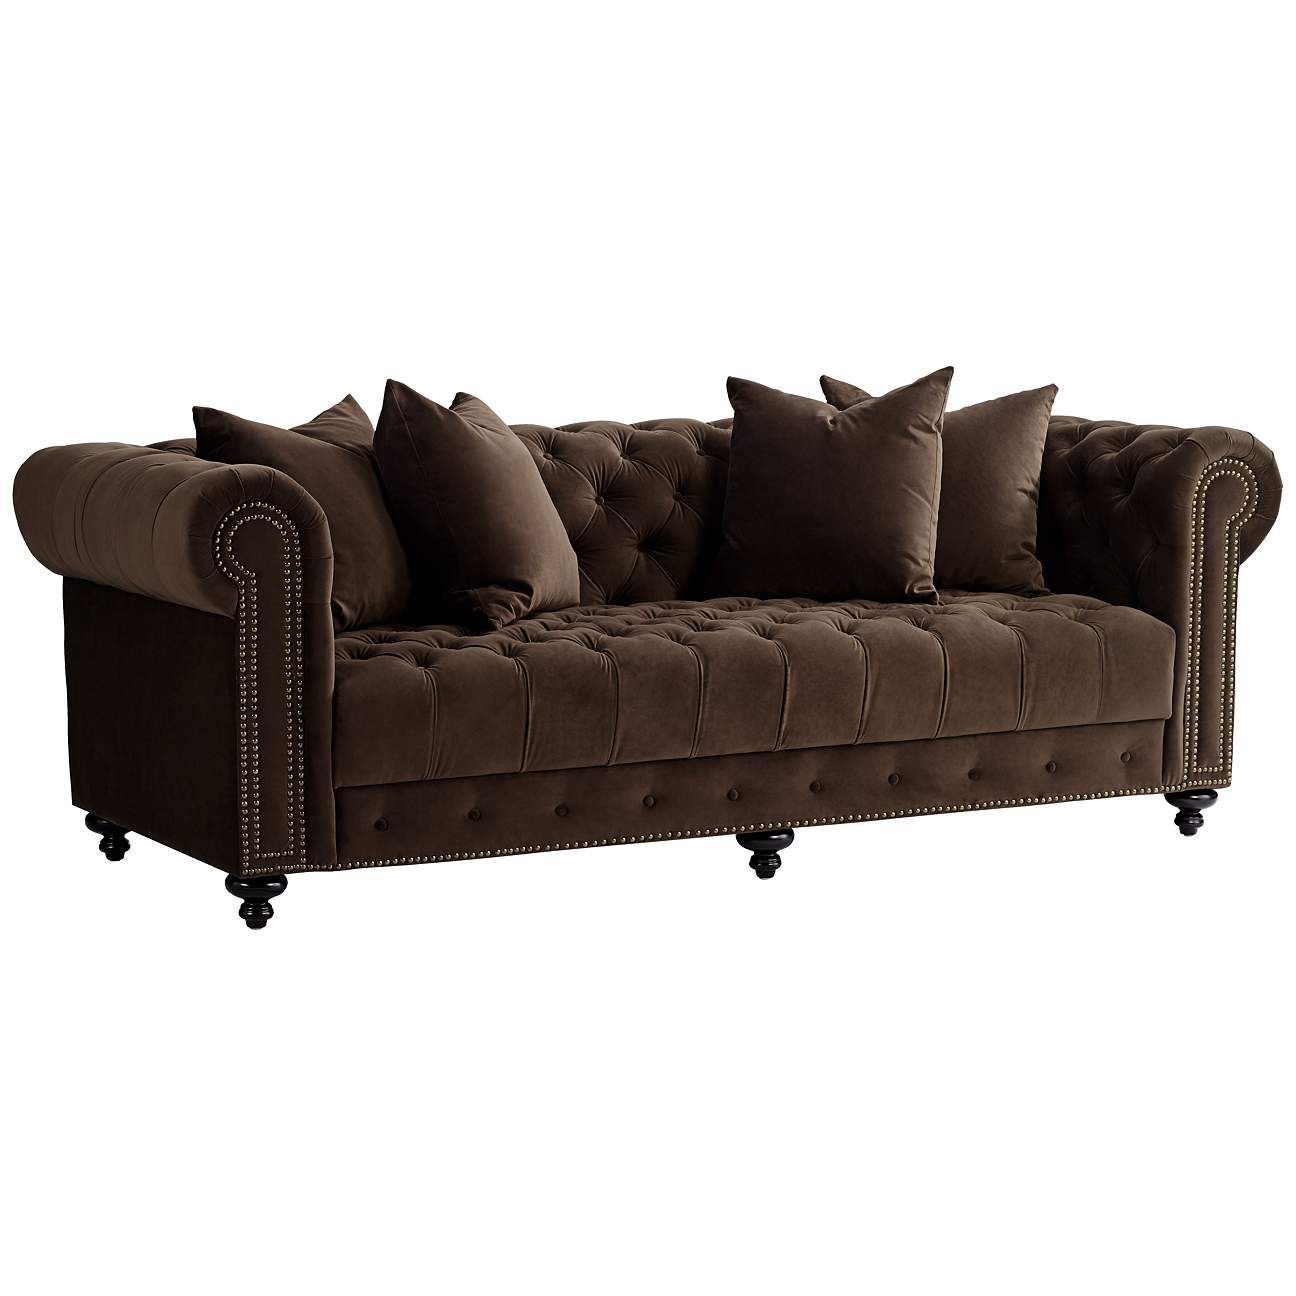 Jules 90"w Chocolate Brown Velvet Tufted Chesterfield Sofa – #58j03 Throughout Sofas In Chocolate Brown (Gallery 3 of 20)